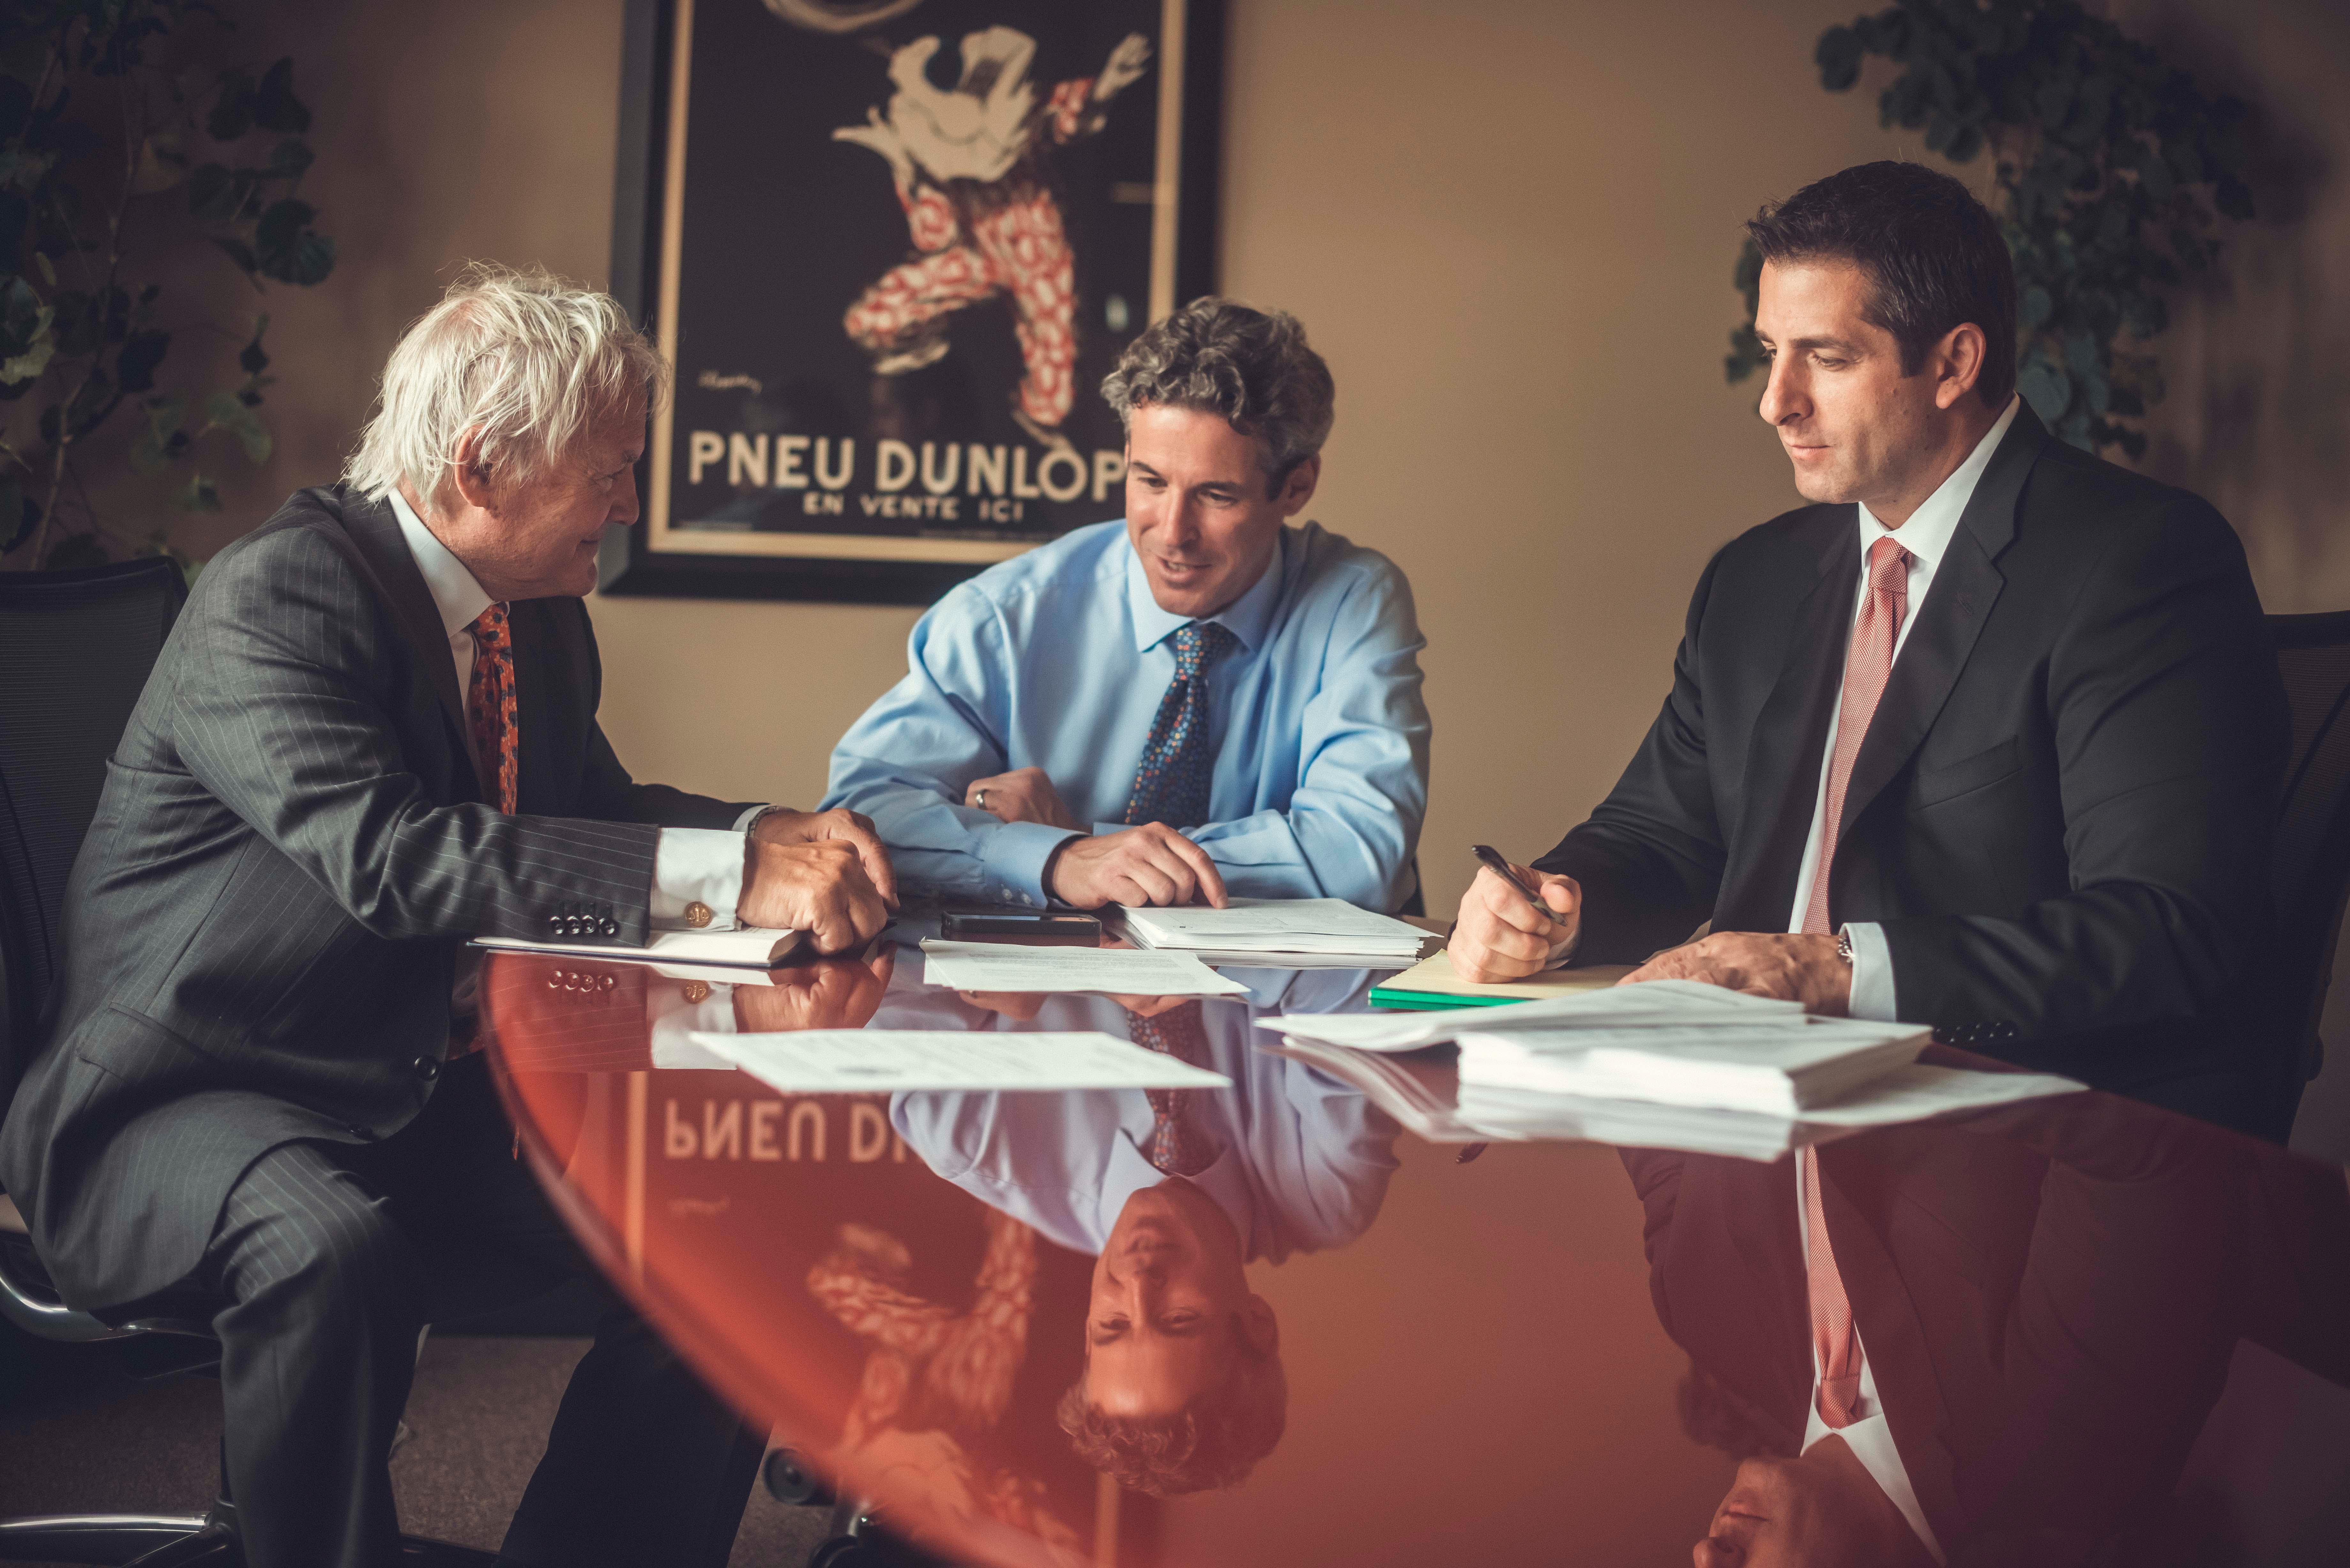 Chicago Personal Injury and truck accidents lawyers Bob Briskman, Gavin Pearlman, and Paul Greenberg.